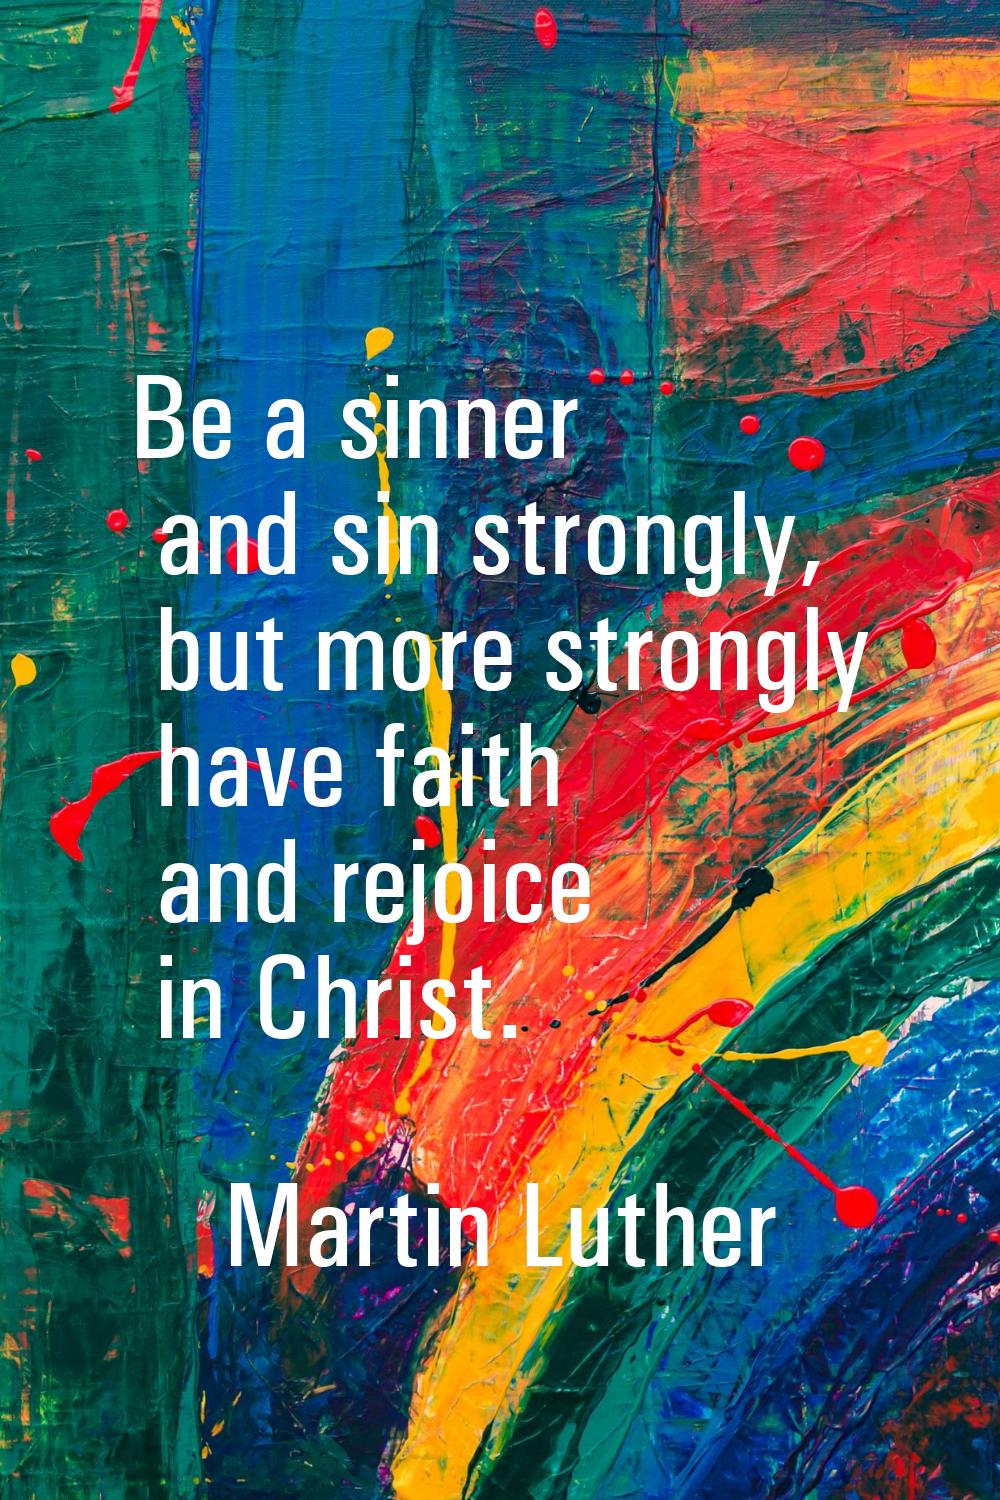 Be a sinner and sin strongly, but more strongly have faith and rejoice in Christ.